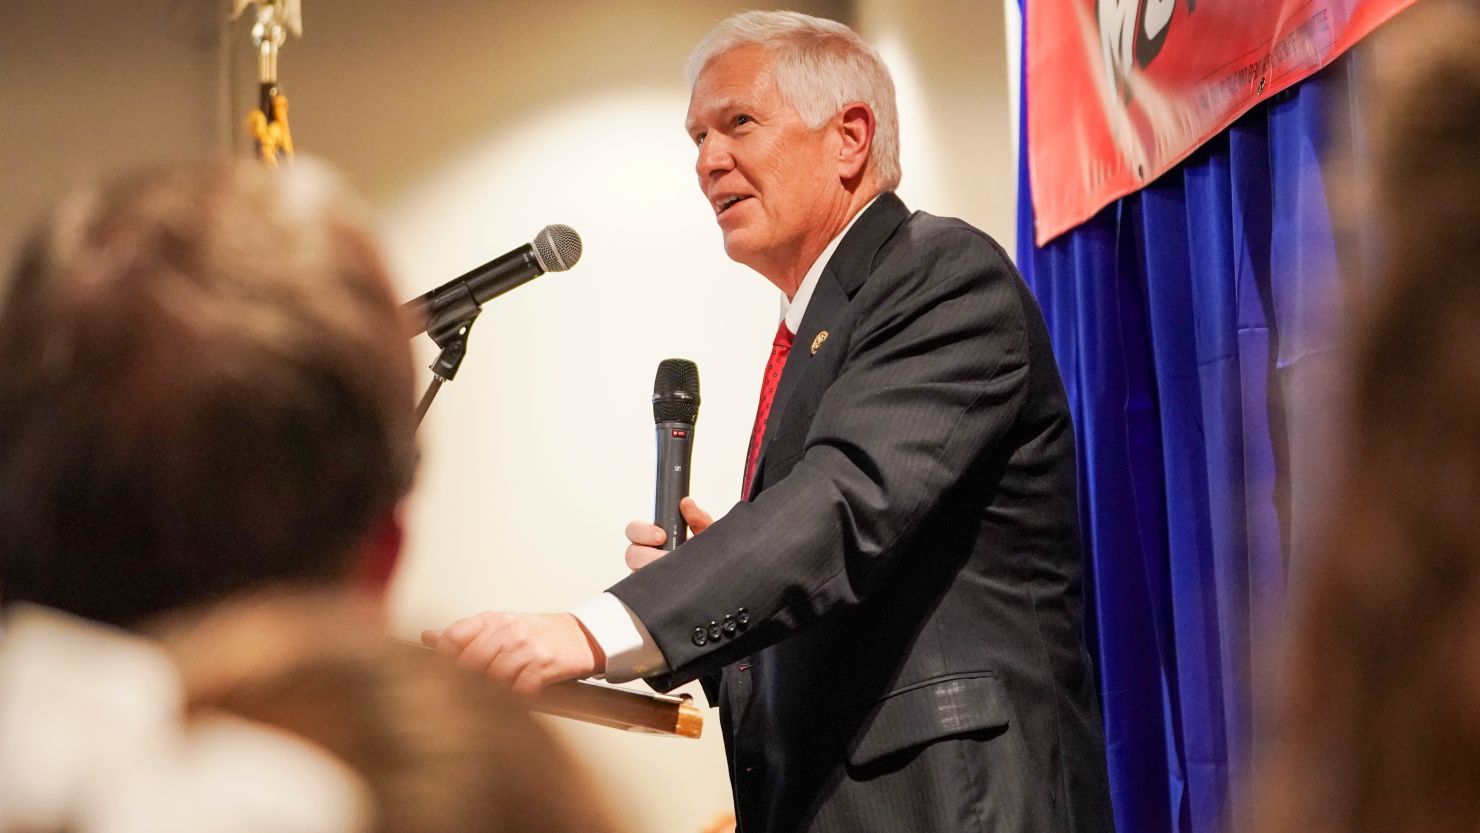 Rep. Mo Brooks makes an announcement in Huntsville, Alabama, on March 22, 2021.